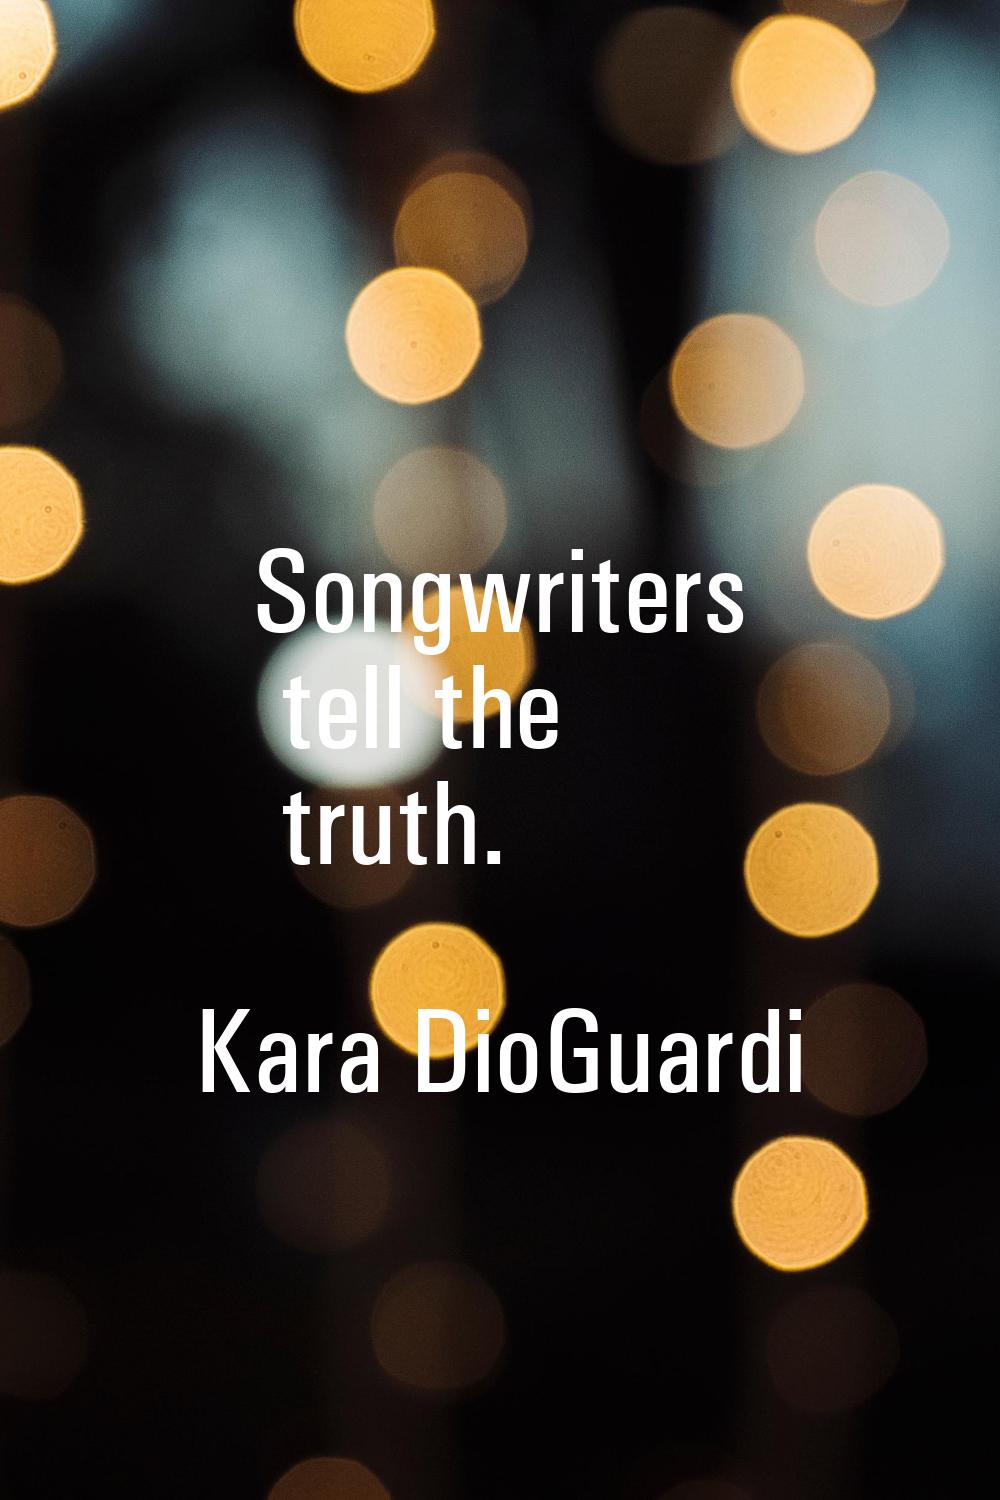 Songwriters tell the truth.